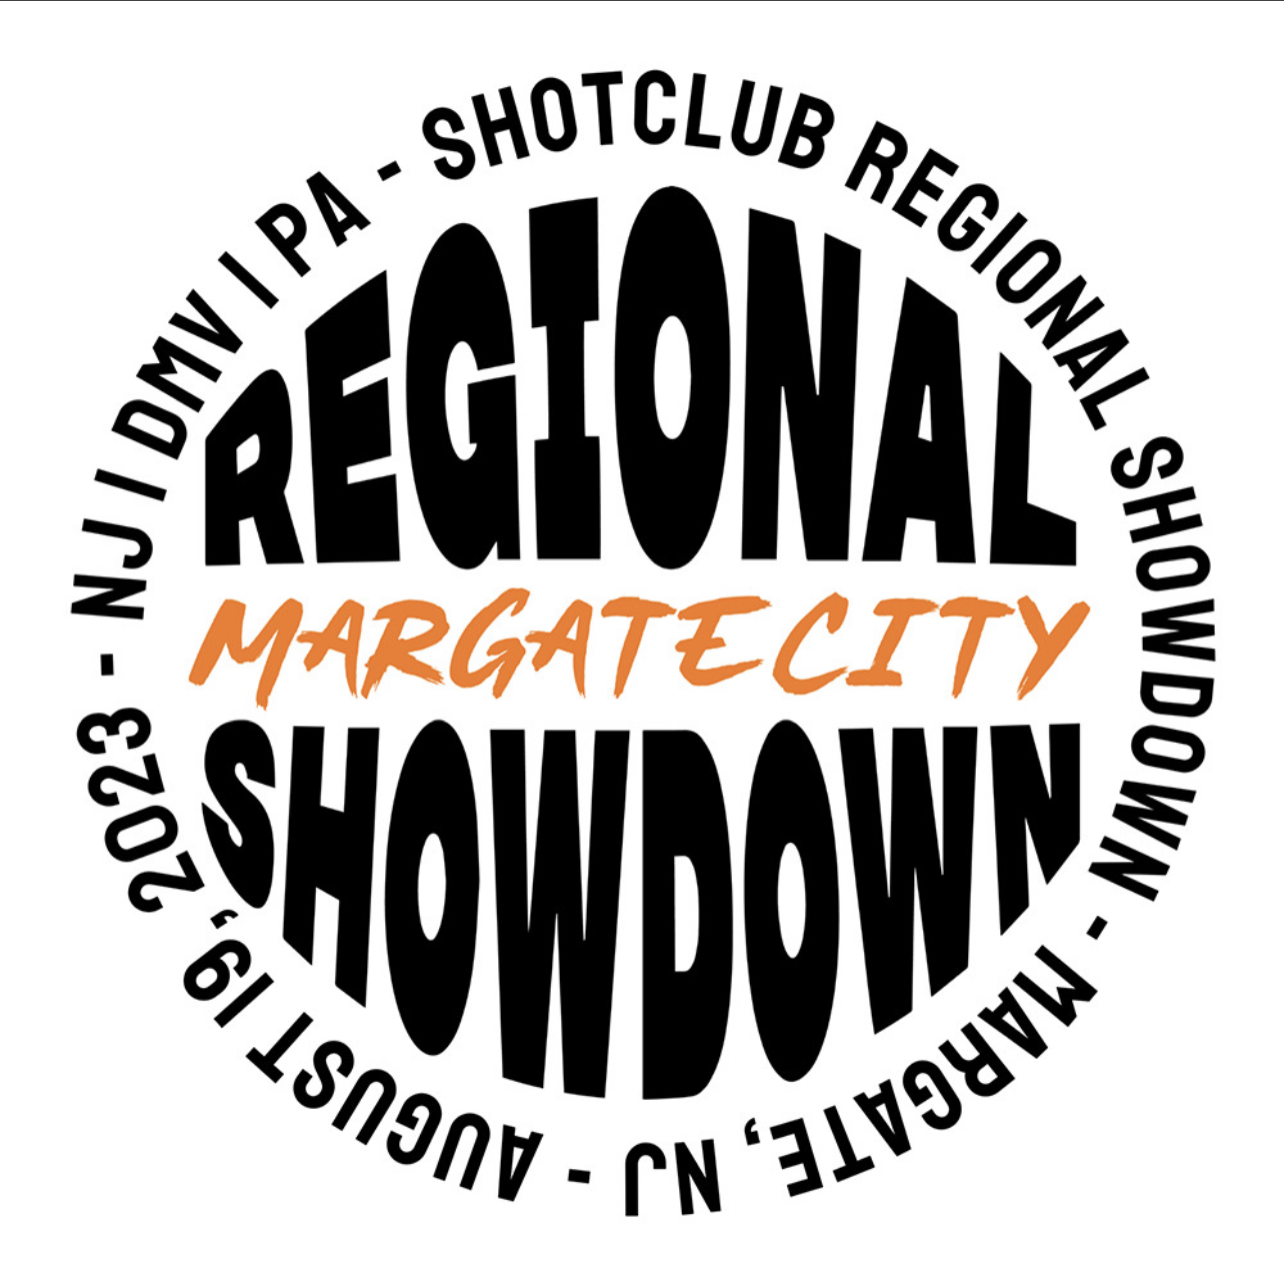 All Shootout Results from Regional Showdown in Margate!